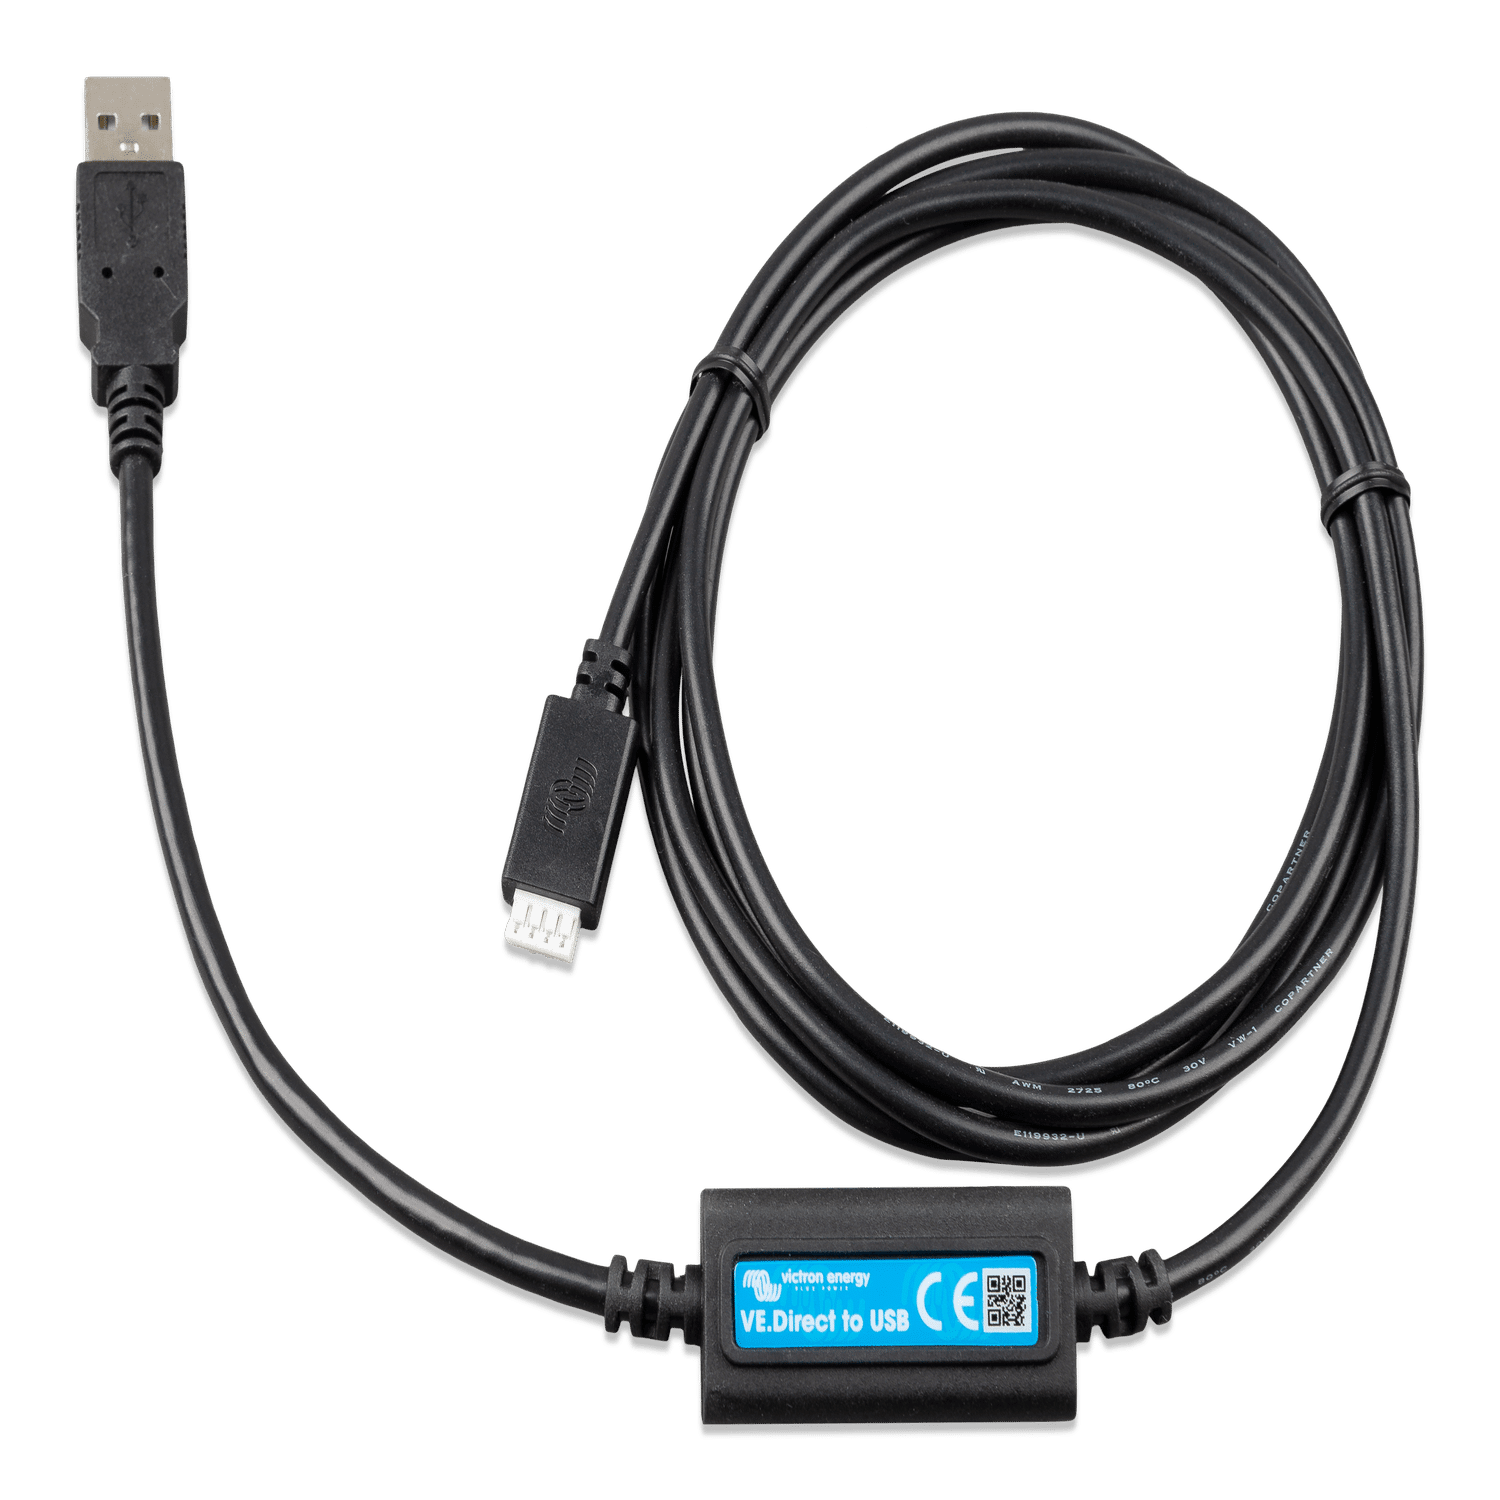 Victron Energy VE.Direct to USB Cable Interface (1)